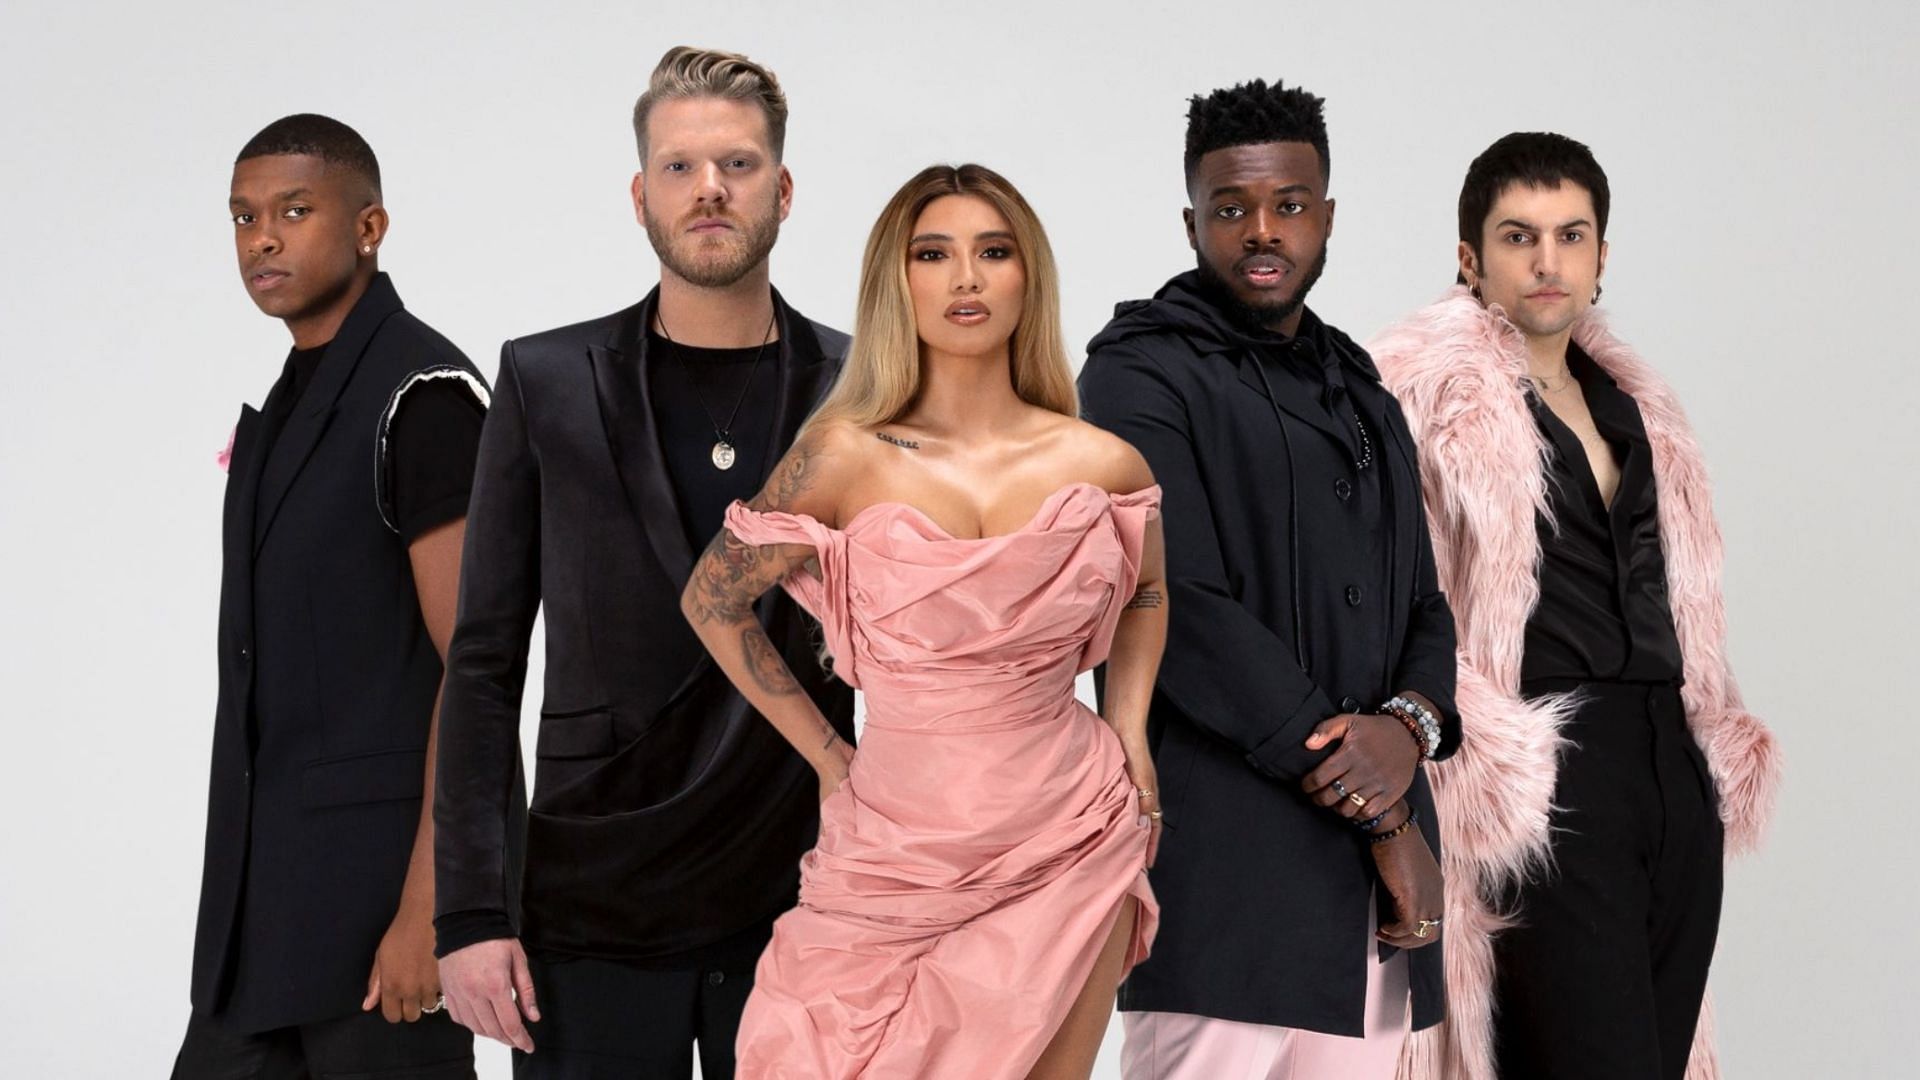 Pentatonix Christmas Tour 2022 Tickets, presale, where to buy, and more